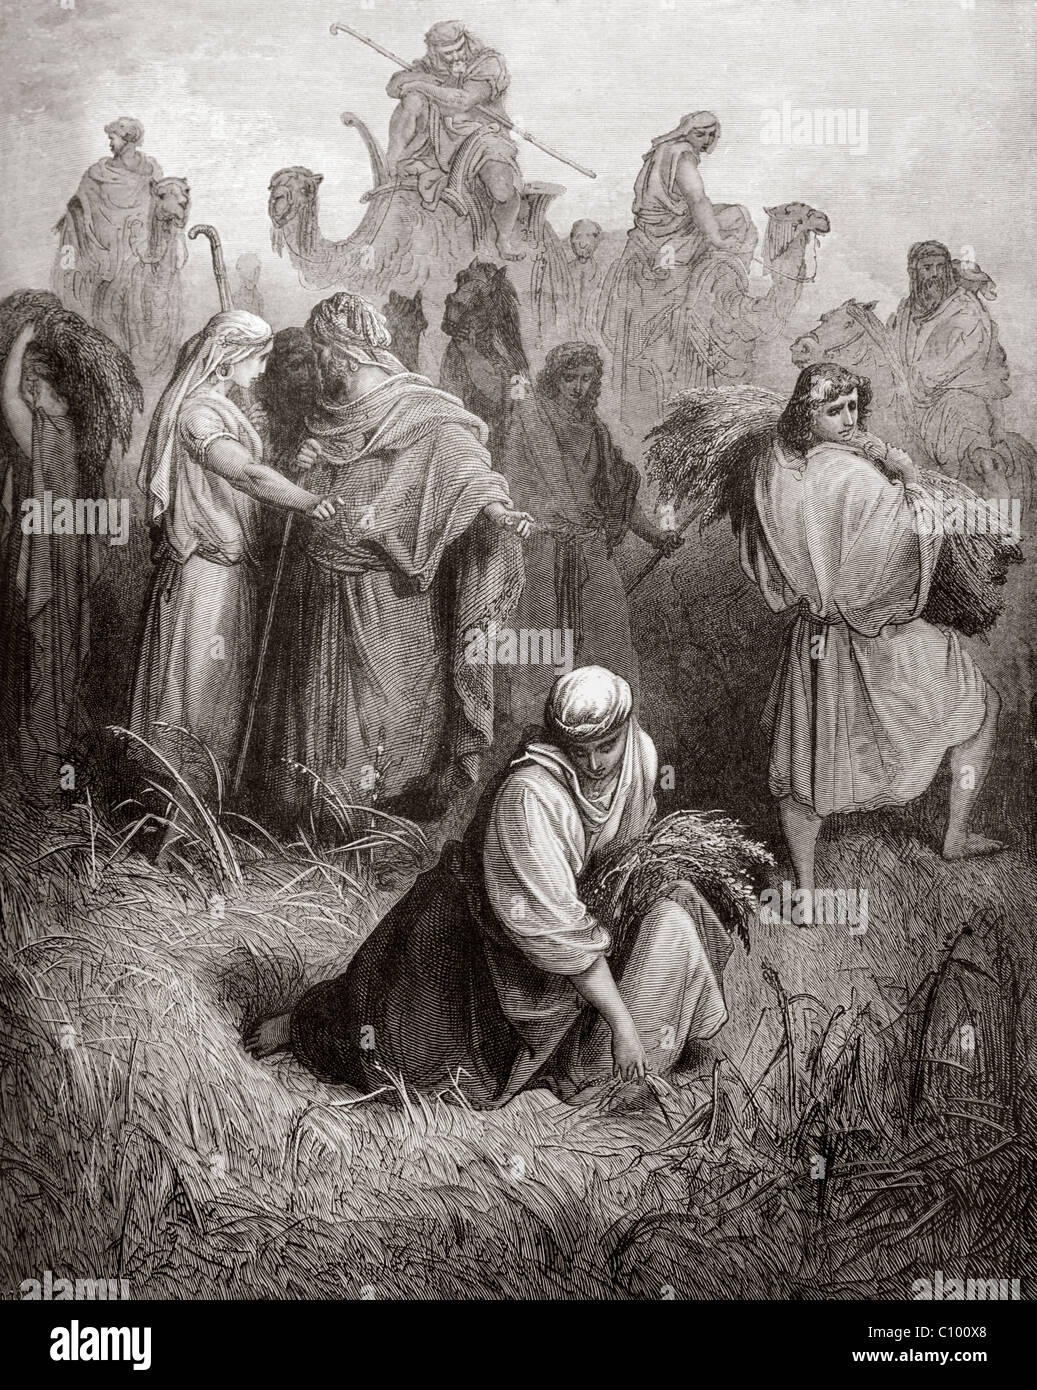 Bible Stories Black And White Illustration Of Boaz and Ruth Book of Ruth 2:22-23 Stock Photo